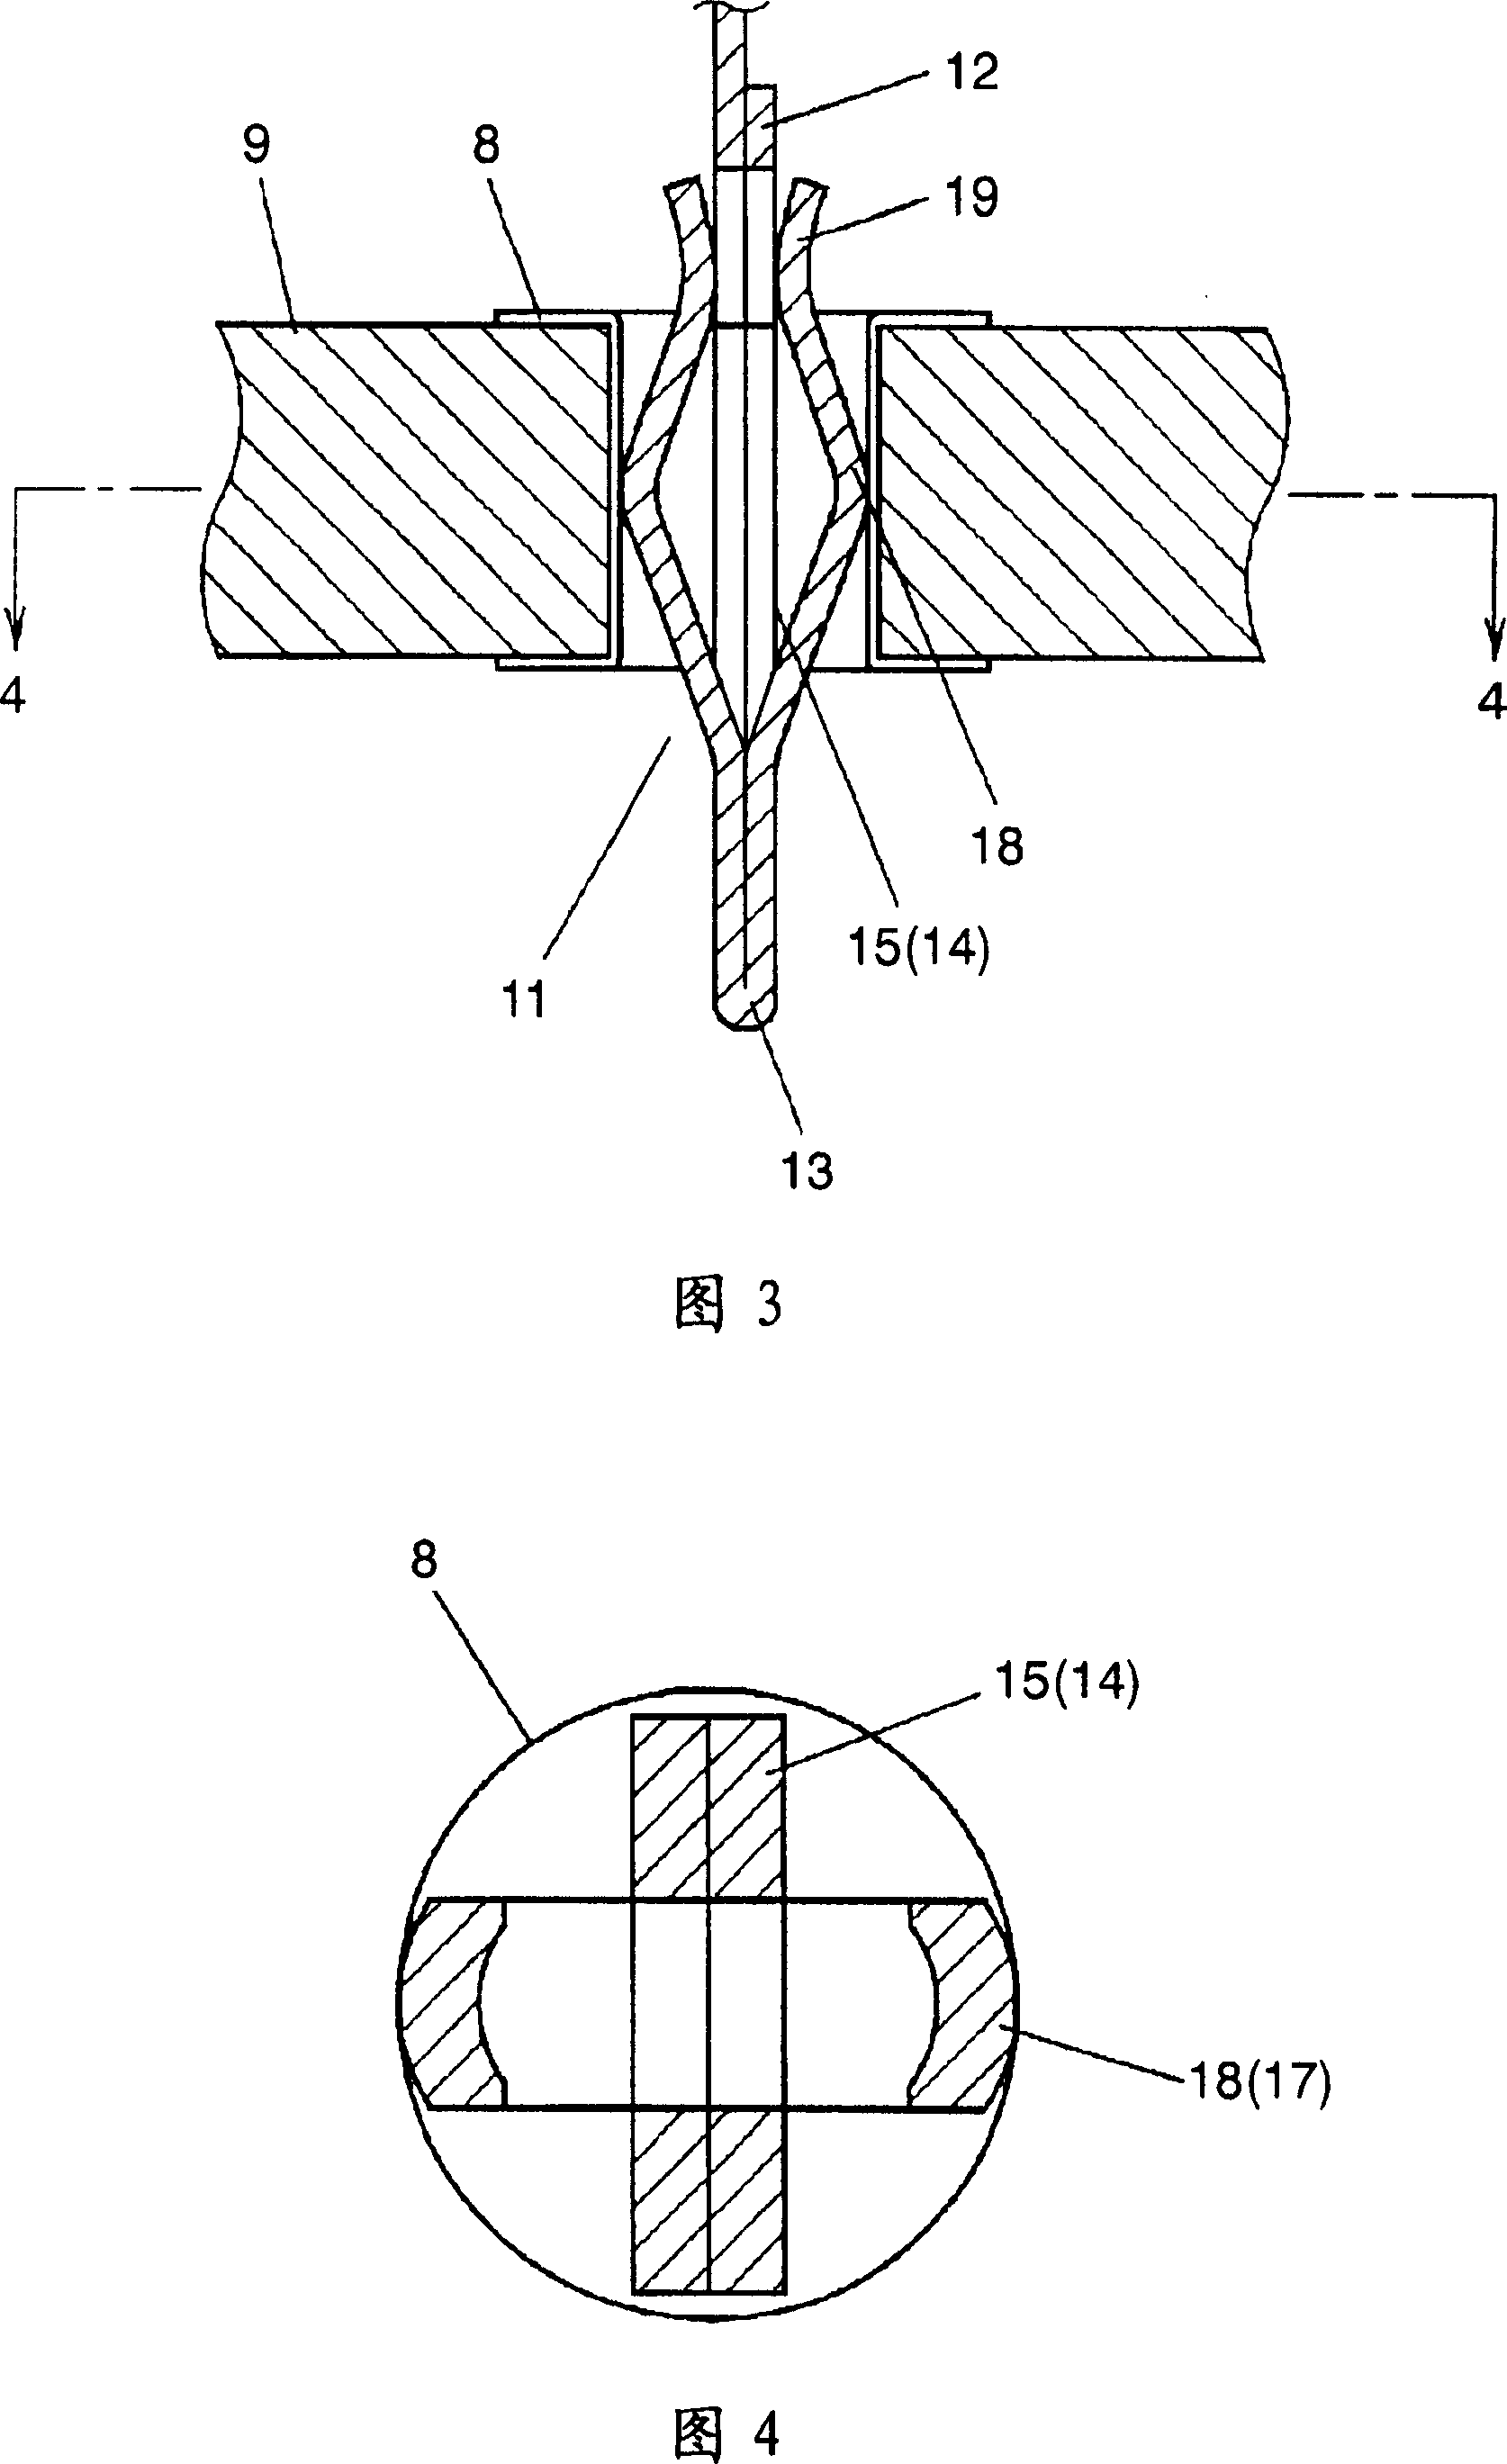 Press-fit fixing terminal, and electronic component having the same terminal